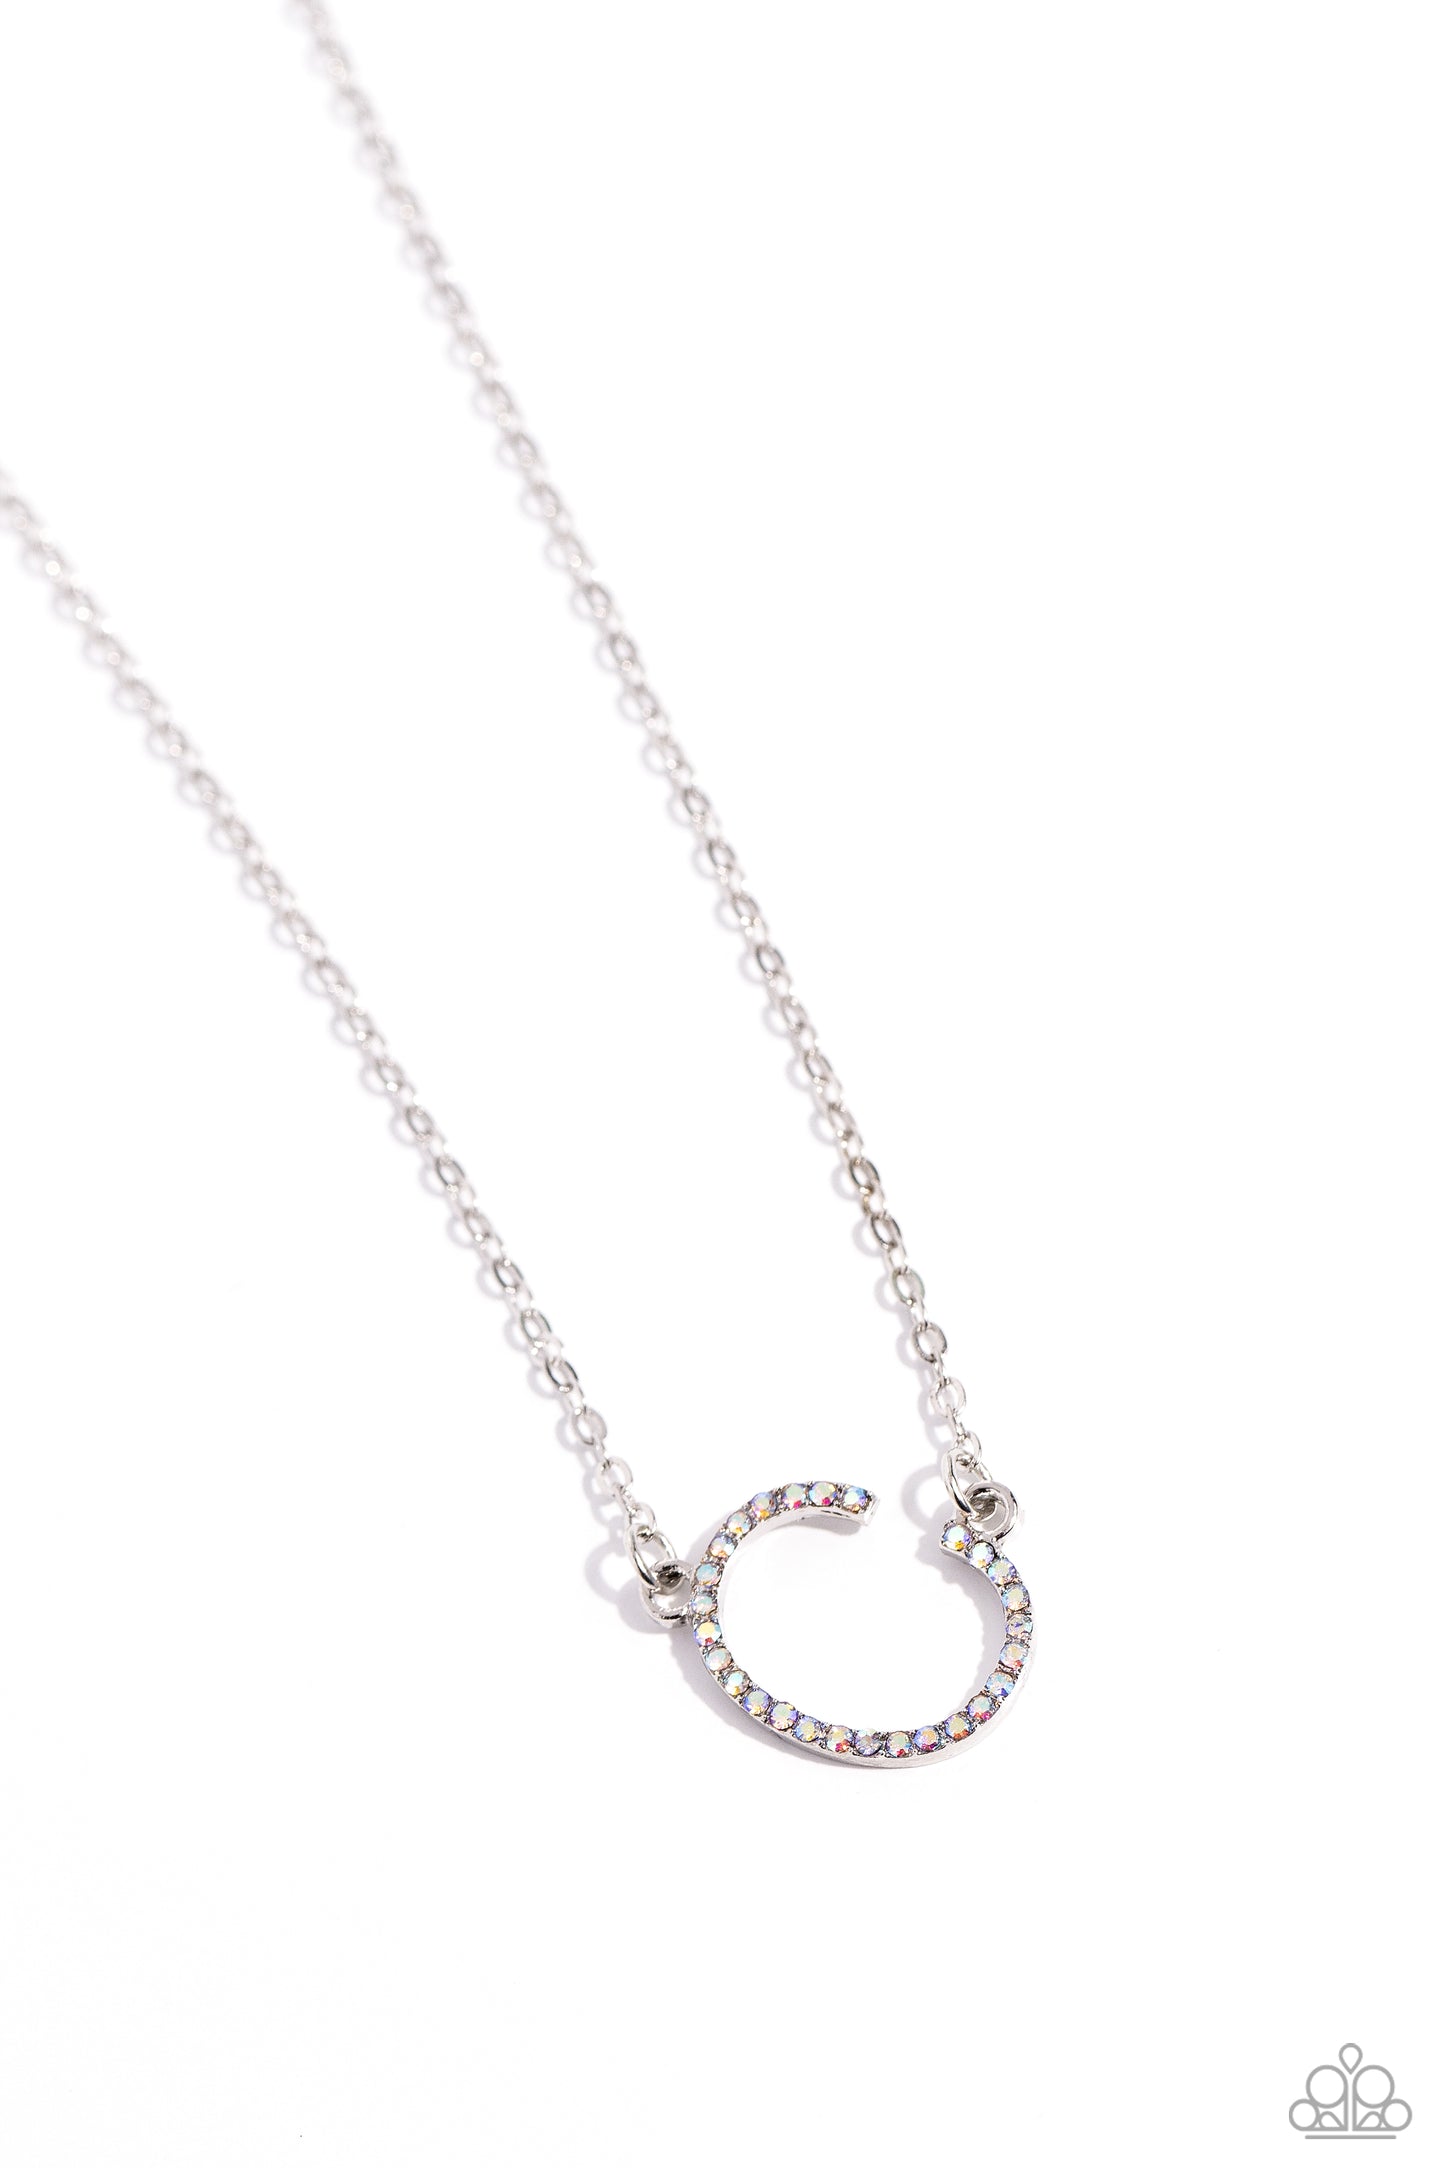 INITIALLY Yours Multi "C" Necklace - Paparazzi Accessories  Embossed with dainty iridescent rhinestones, a silver letter "C" hovers below the collar from a dainty silver chain, for a sentimentally simple design. Features an adjustable clasp closure. Due to its prismatic palette, color may vary.  Sold as one individual necklace. Includes one pair of matching earrings.  P2DA-MTXX-126XX